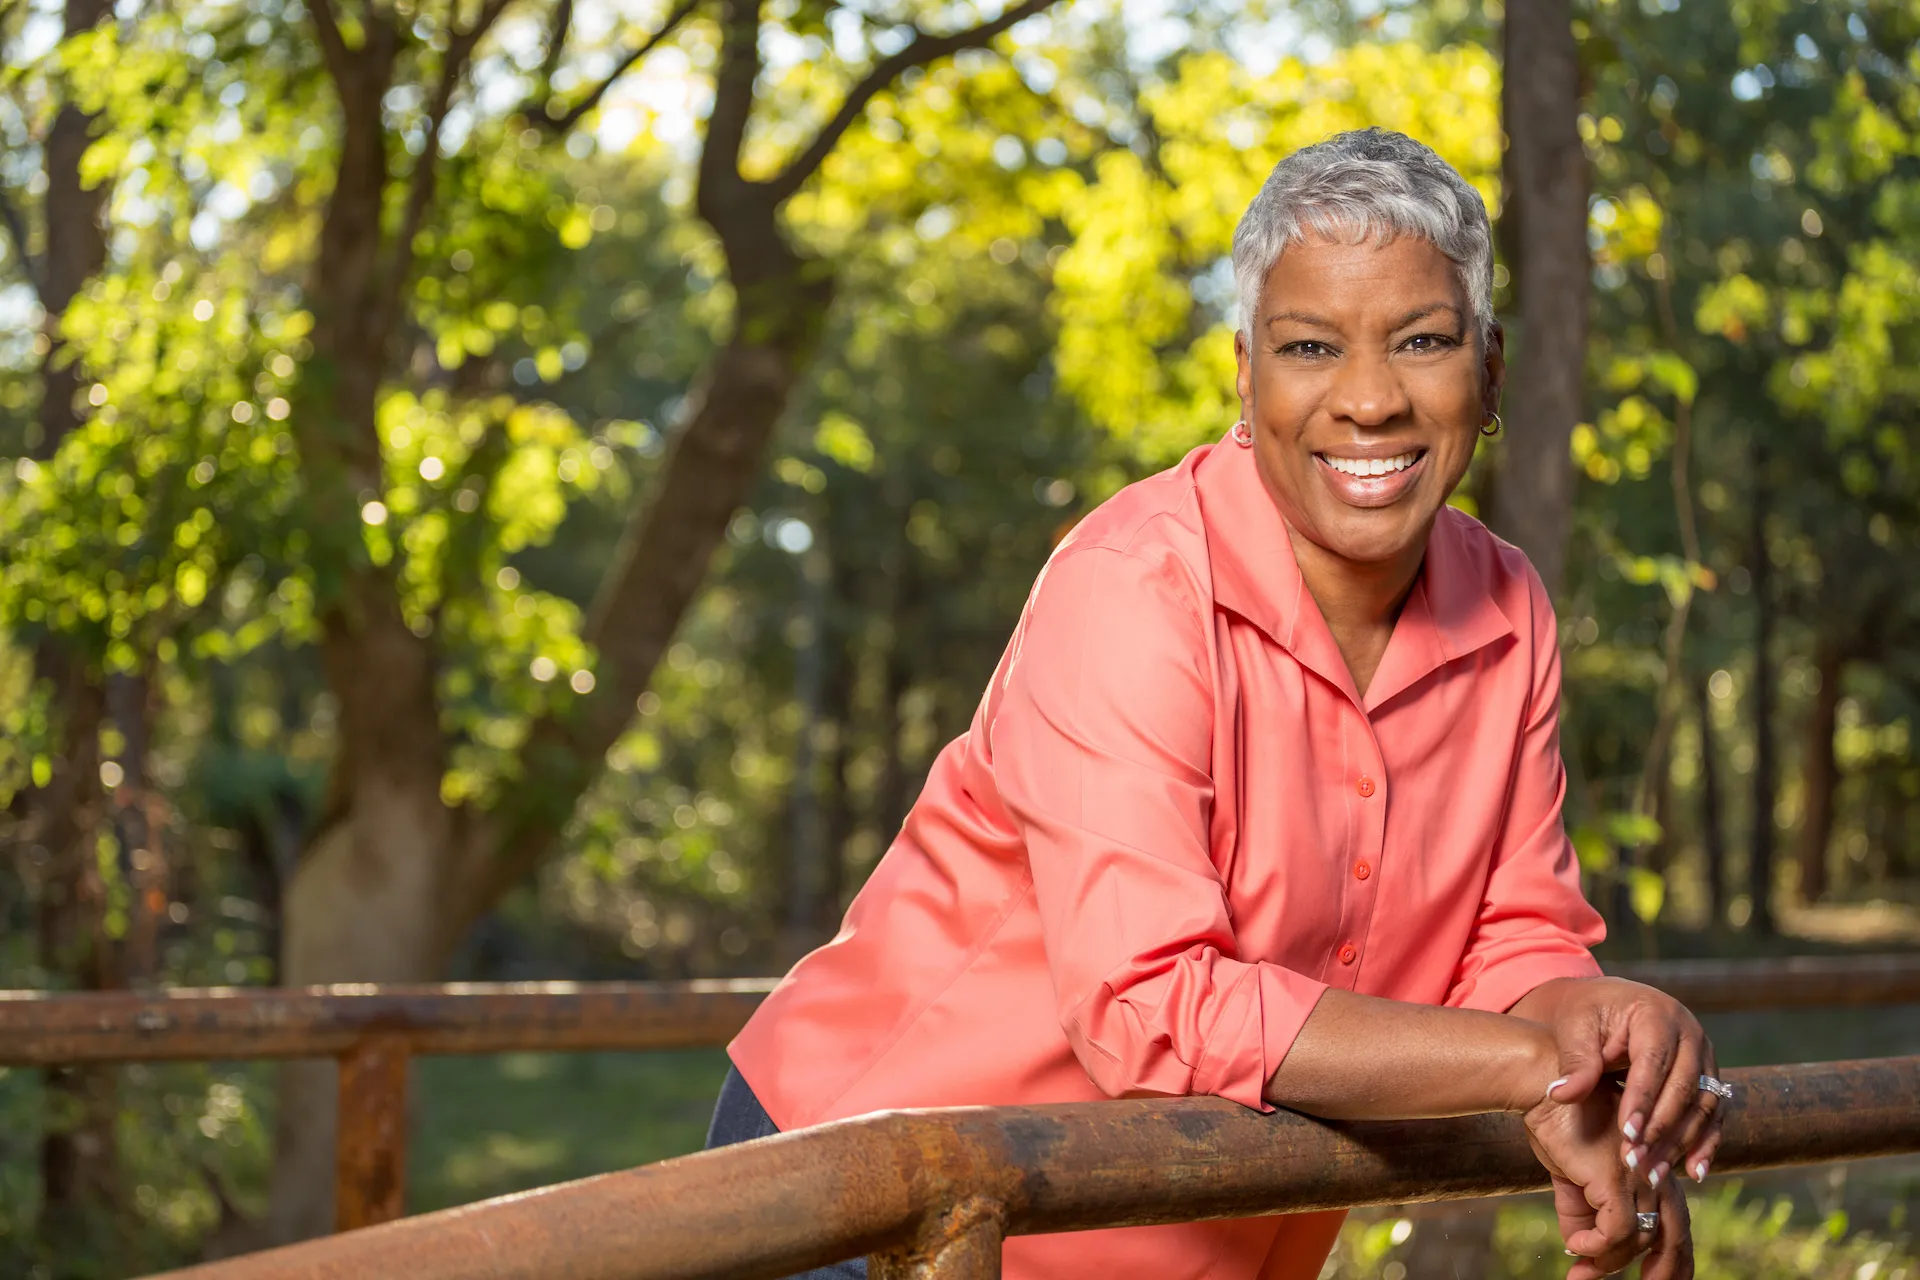 An older african american woman with short gray hair, smiling in a pink shirt, leans on a fence in a sunlit park.